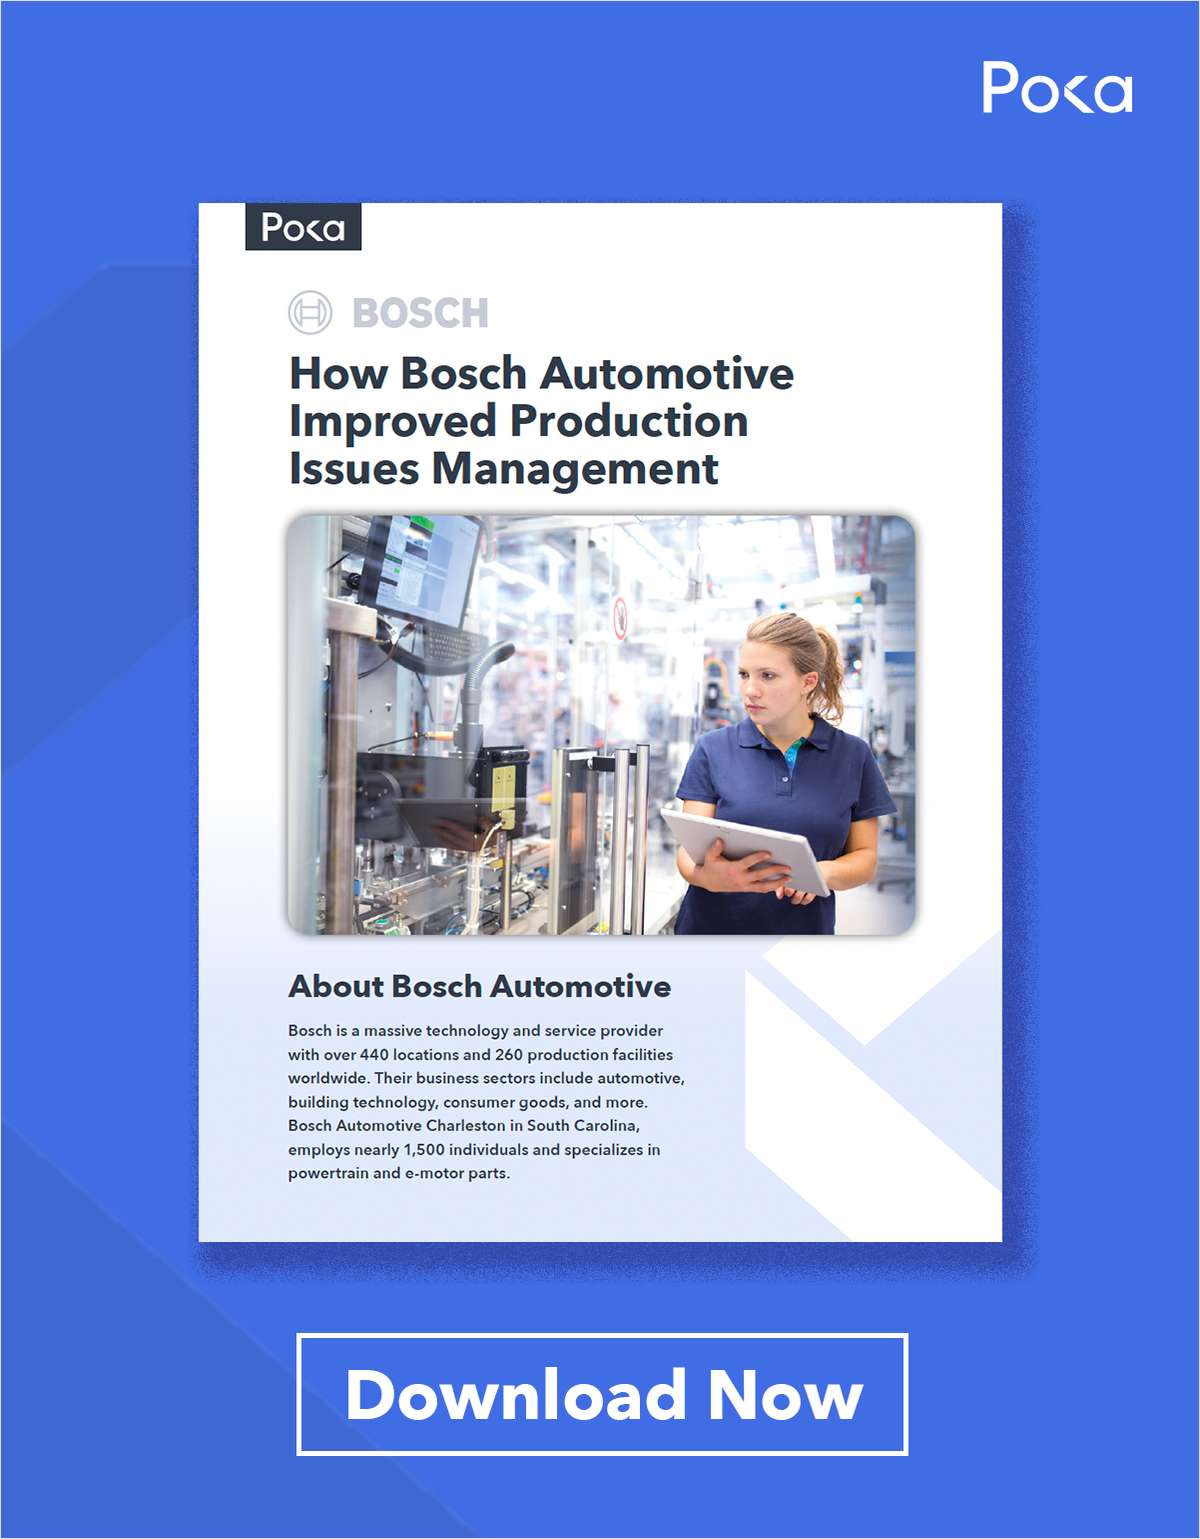 How Bosch Automotive Improved Production Issues Management